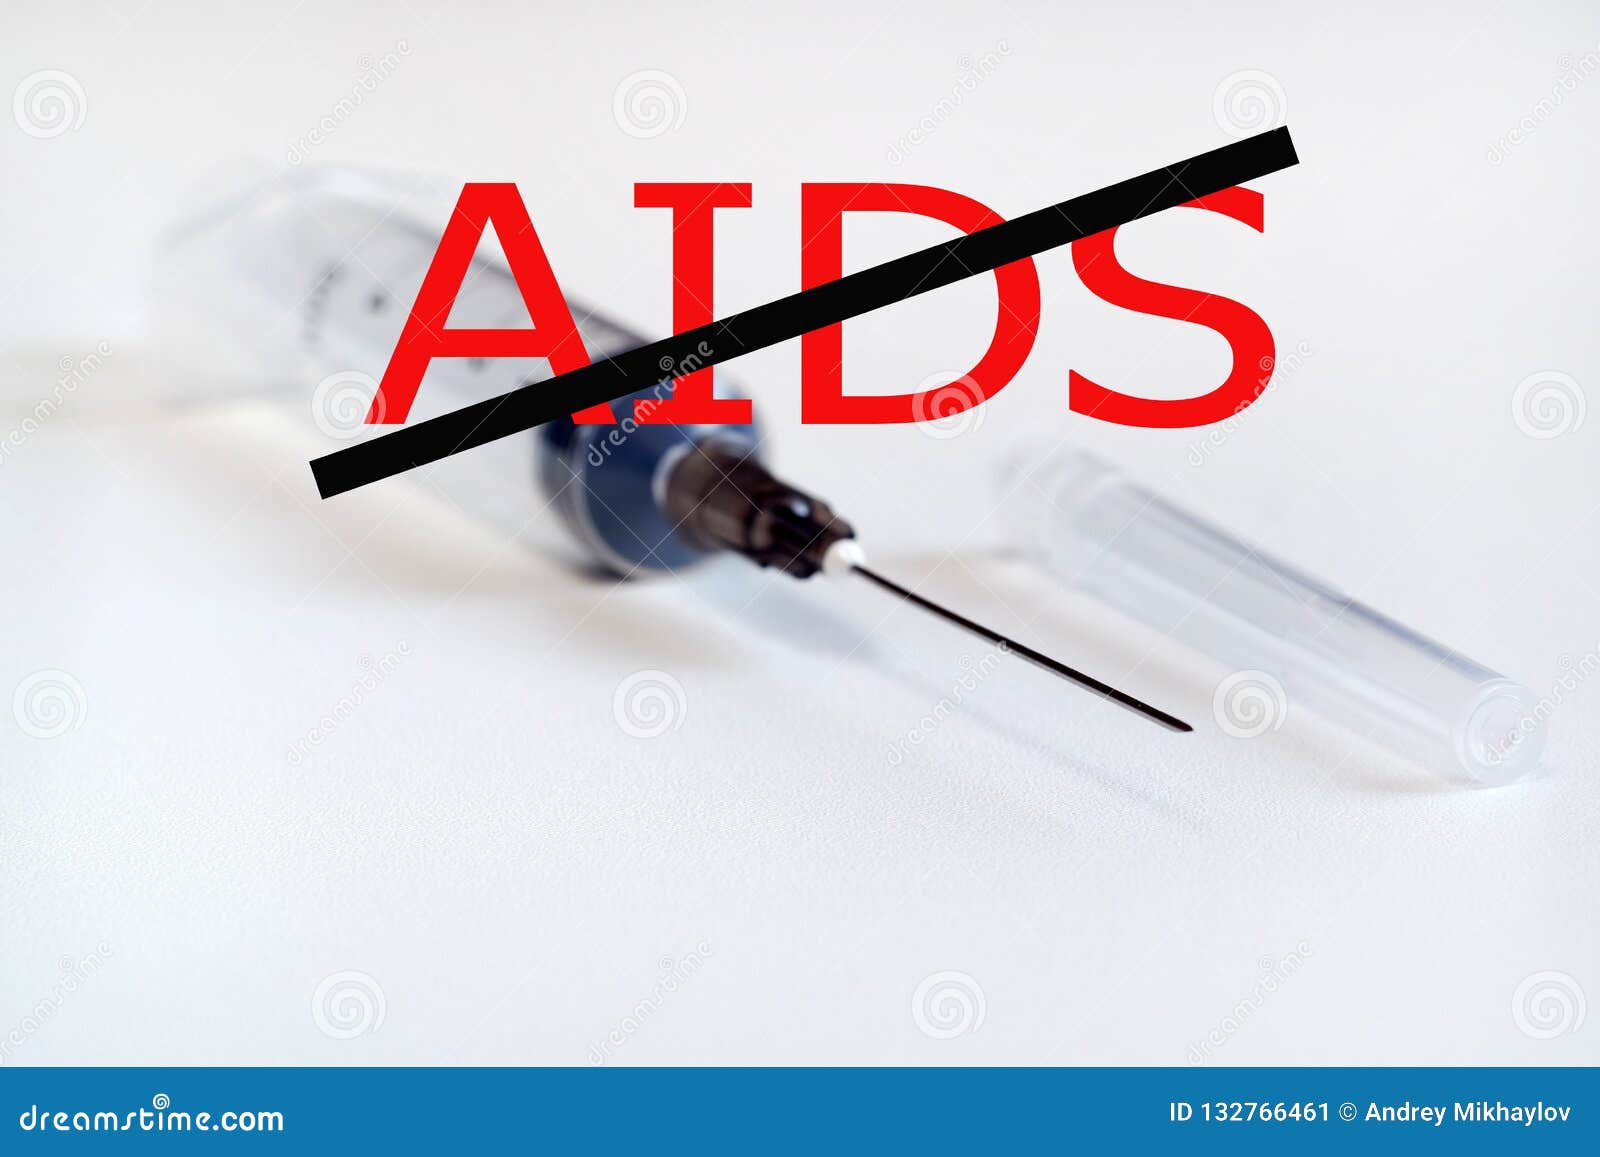 stop aids. no drugs. syringe with needle on light background. the needle in the protective cap